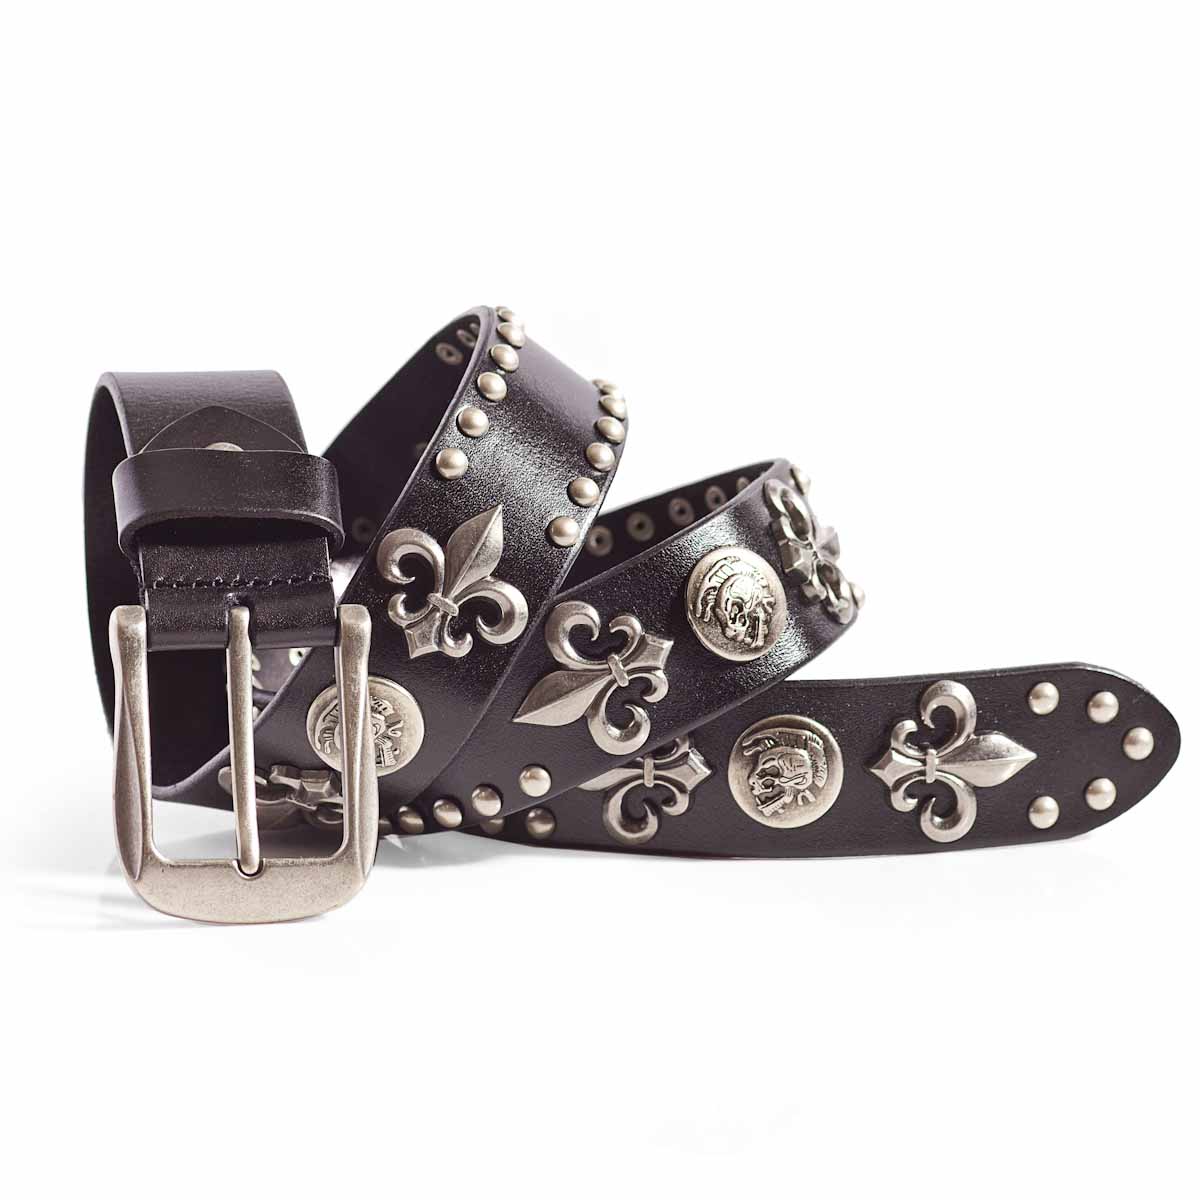 Accessories Belts Studded Belts Esprit Studded Belt multicolored casual look 